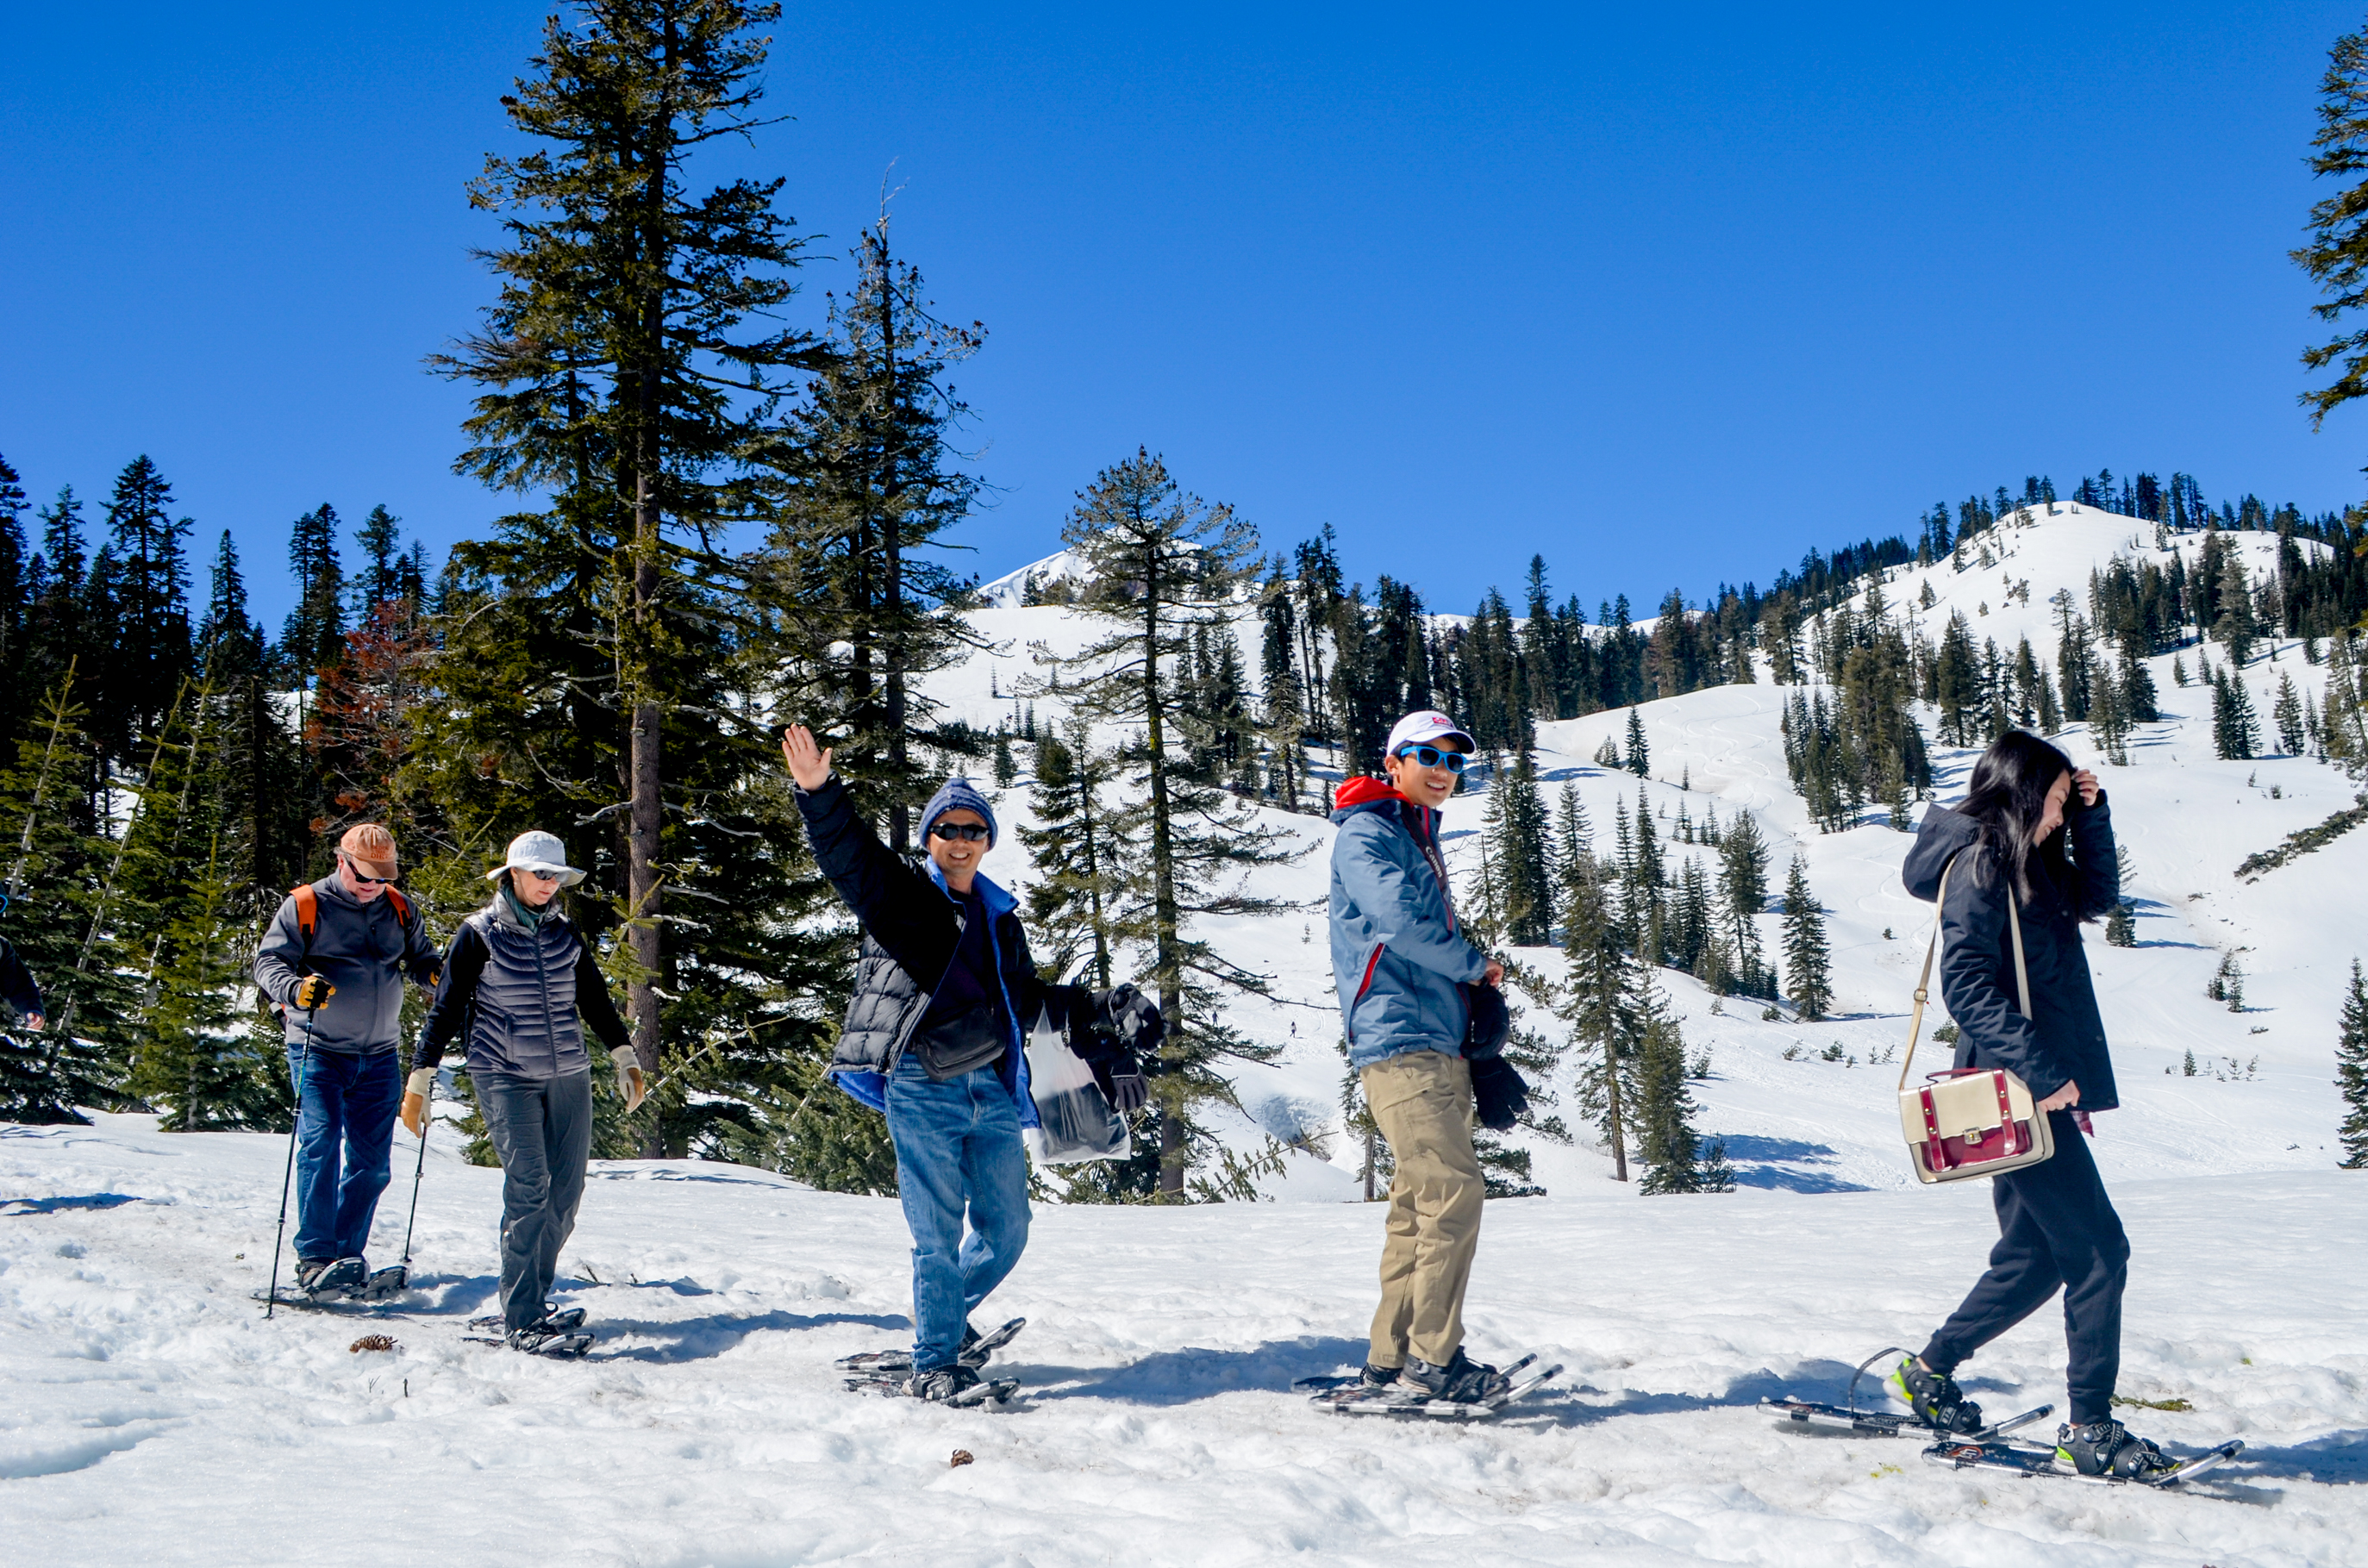 Visitors are Walking on the snow for a Ranger-led Snowshoe Walk